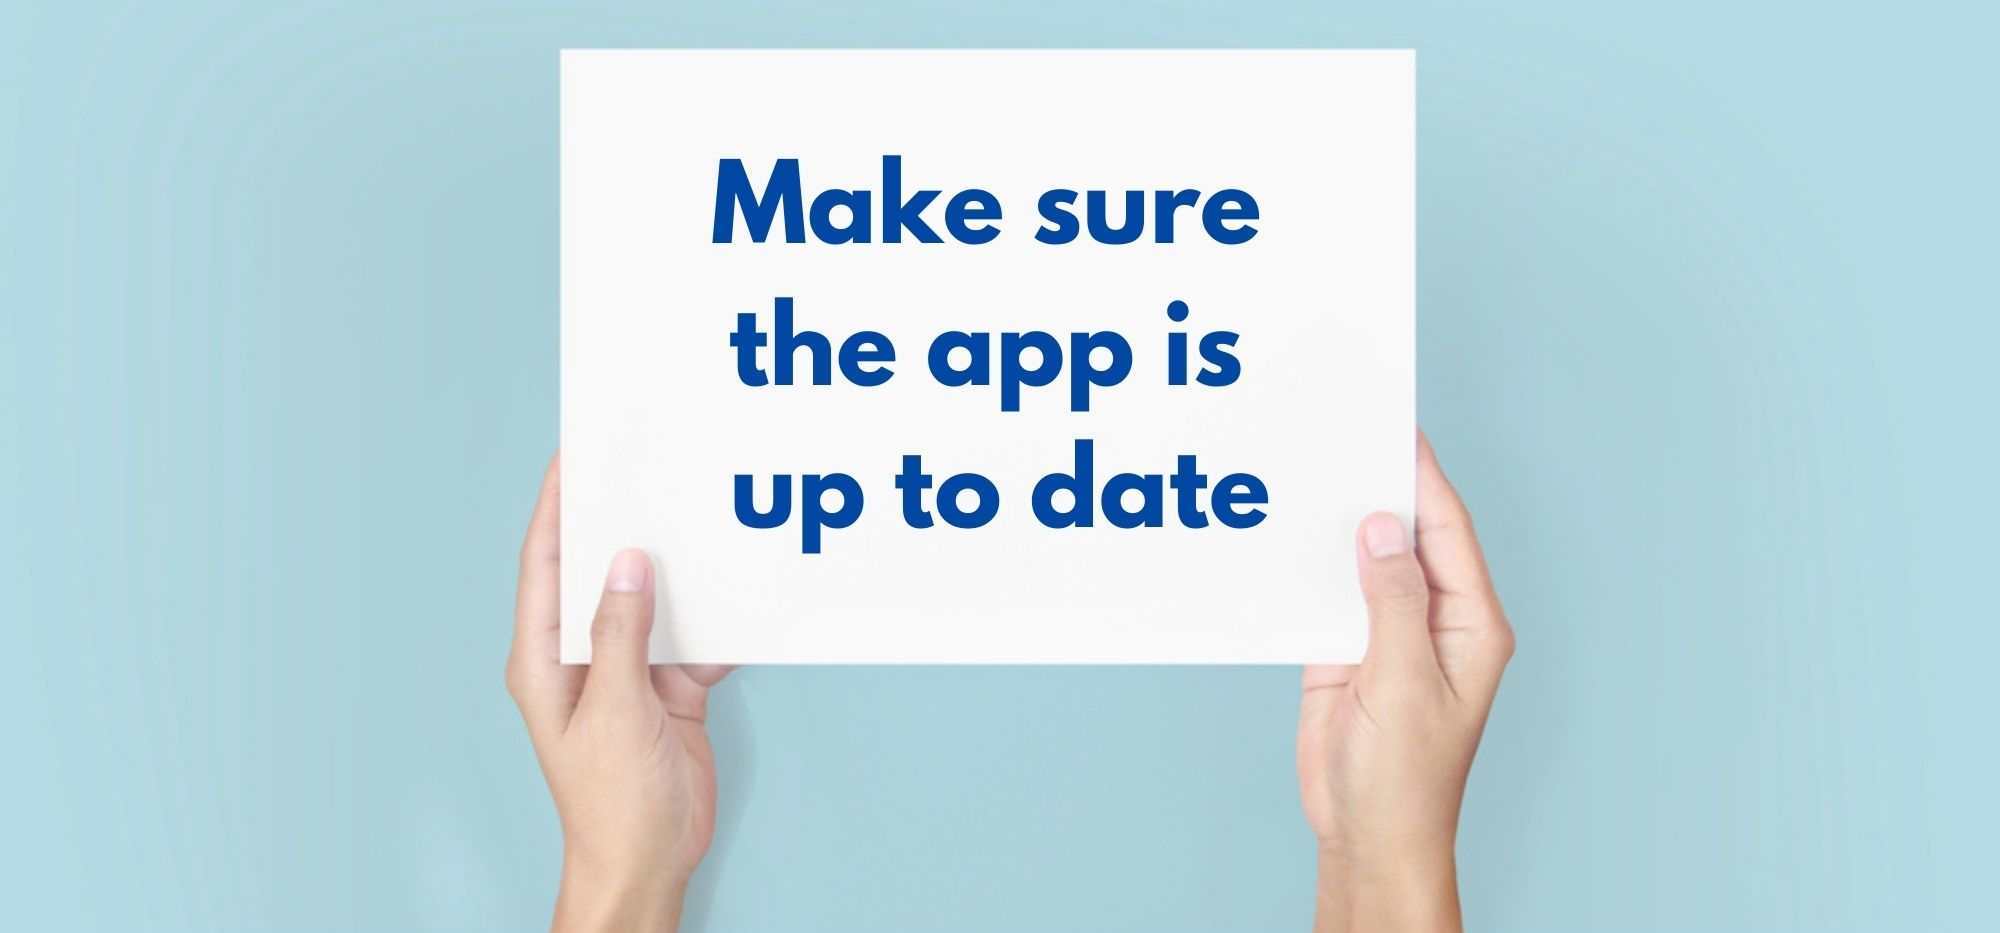 Make sure the app is up to date